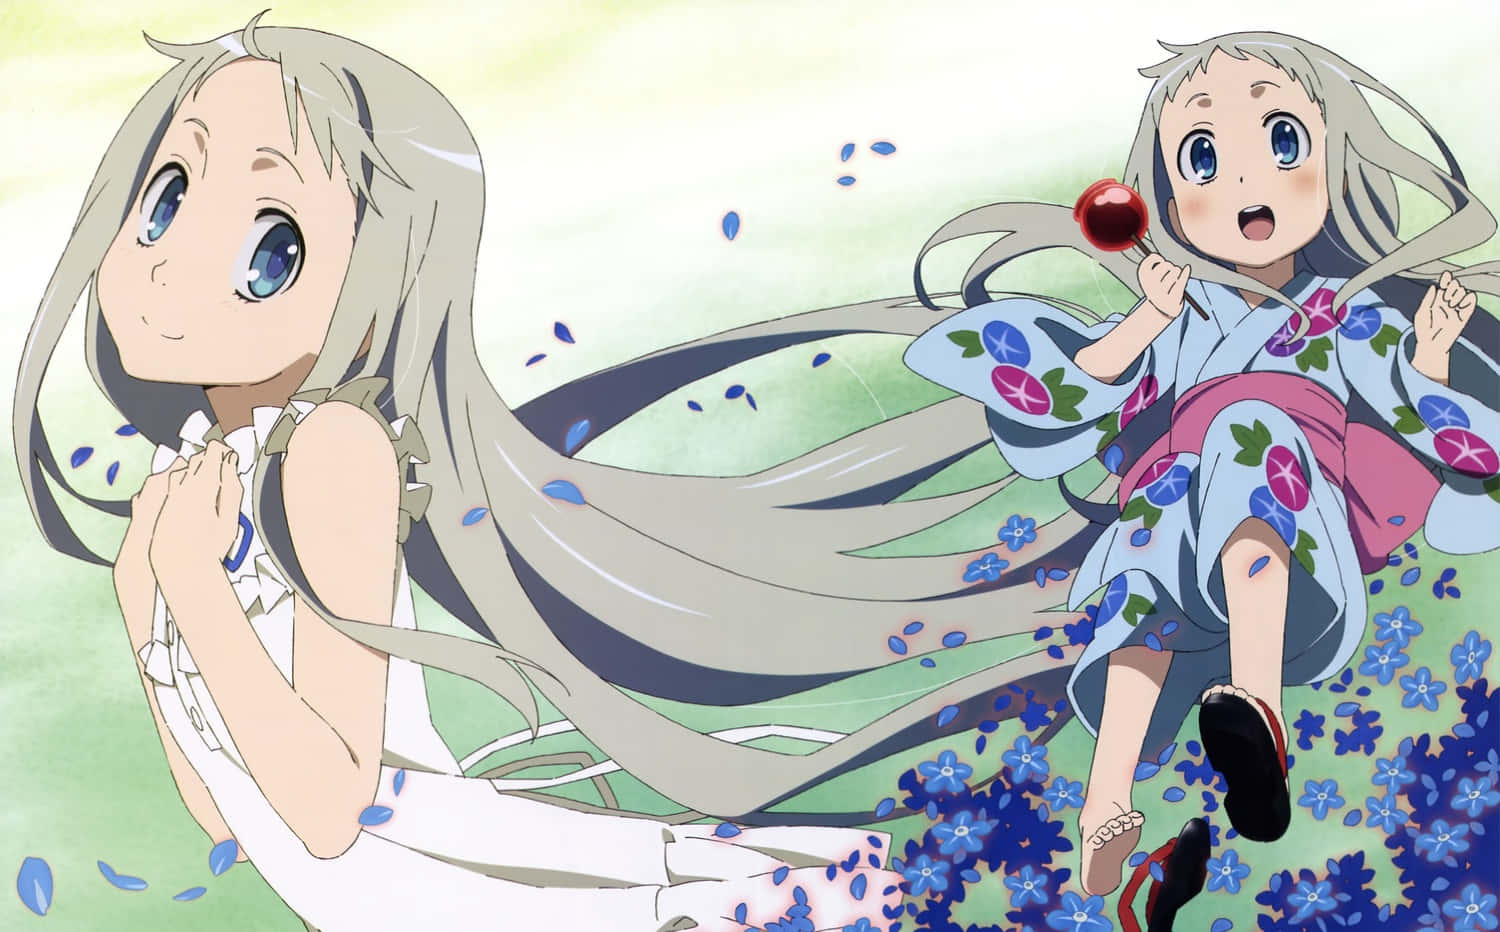 Best Friends from Anohana